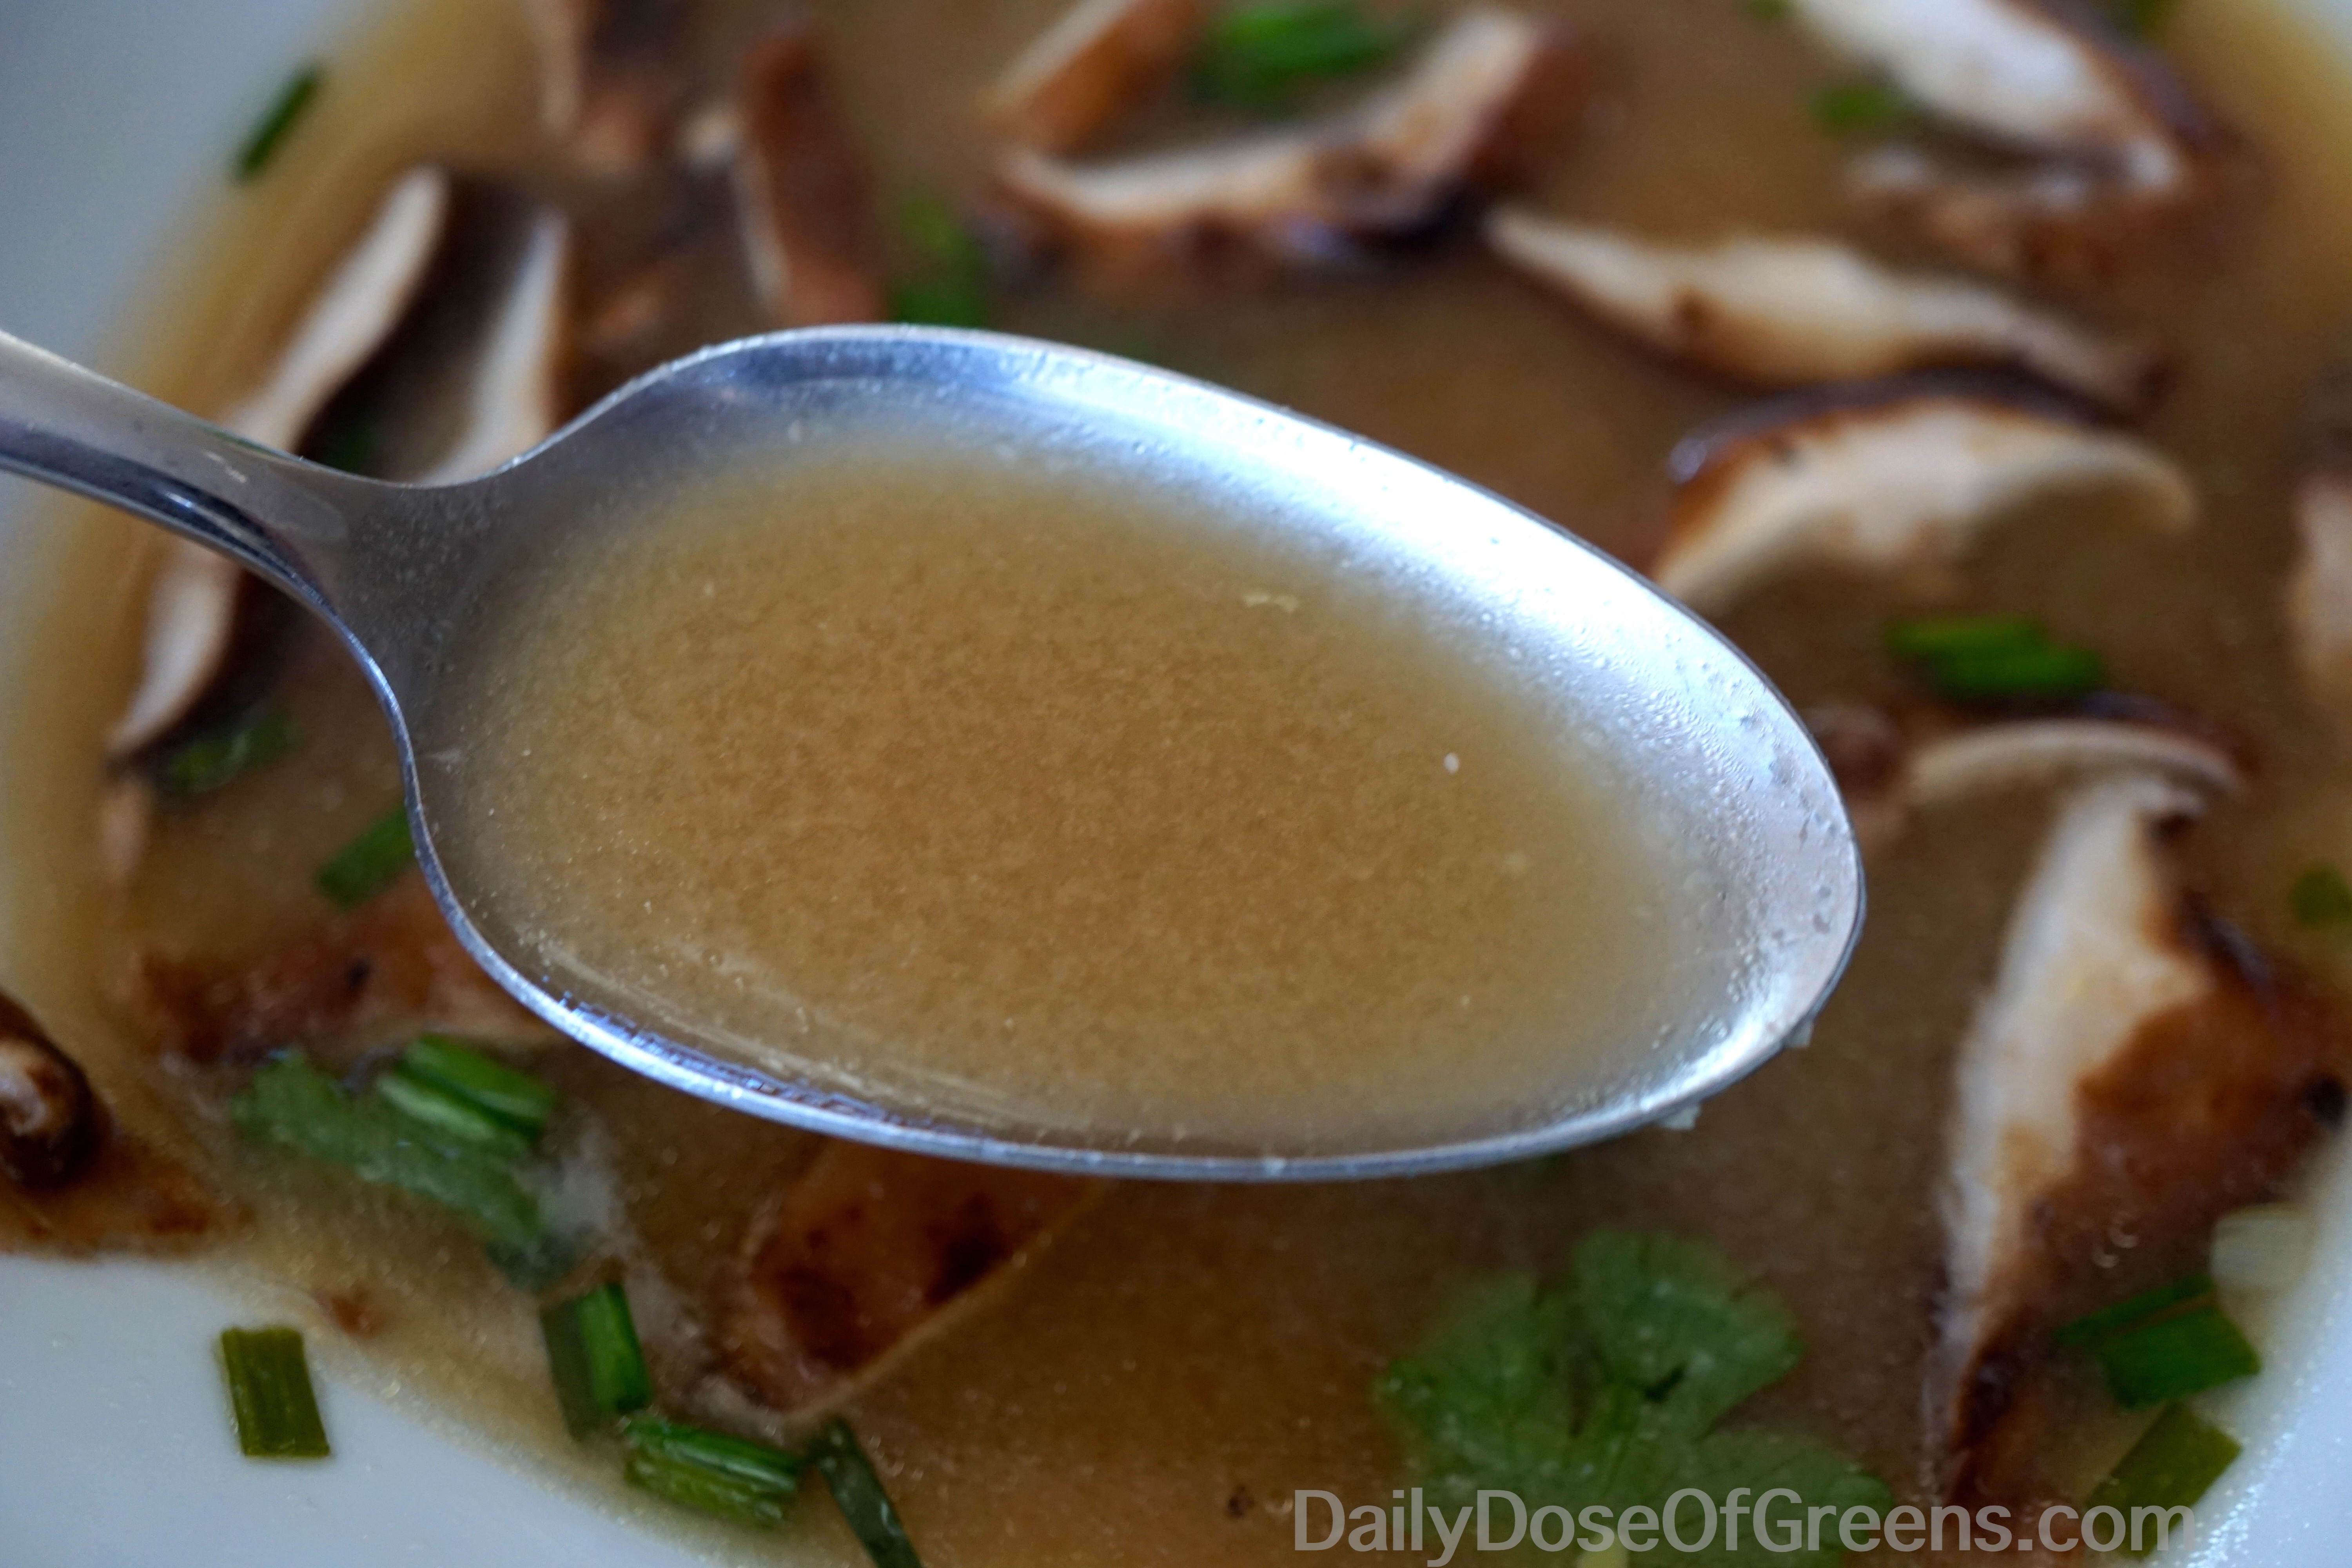 If you're really nauseated, you might want to just make the broth and leave out the mushrooms, bamboo shoots, and greens.